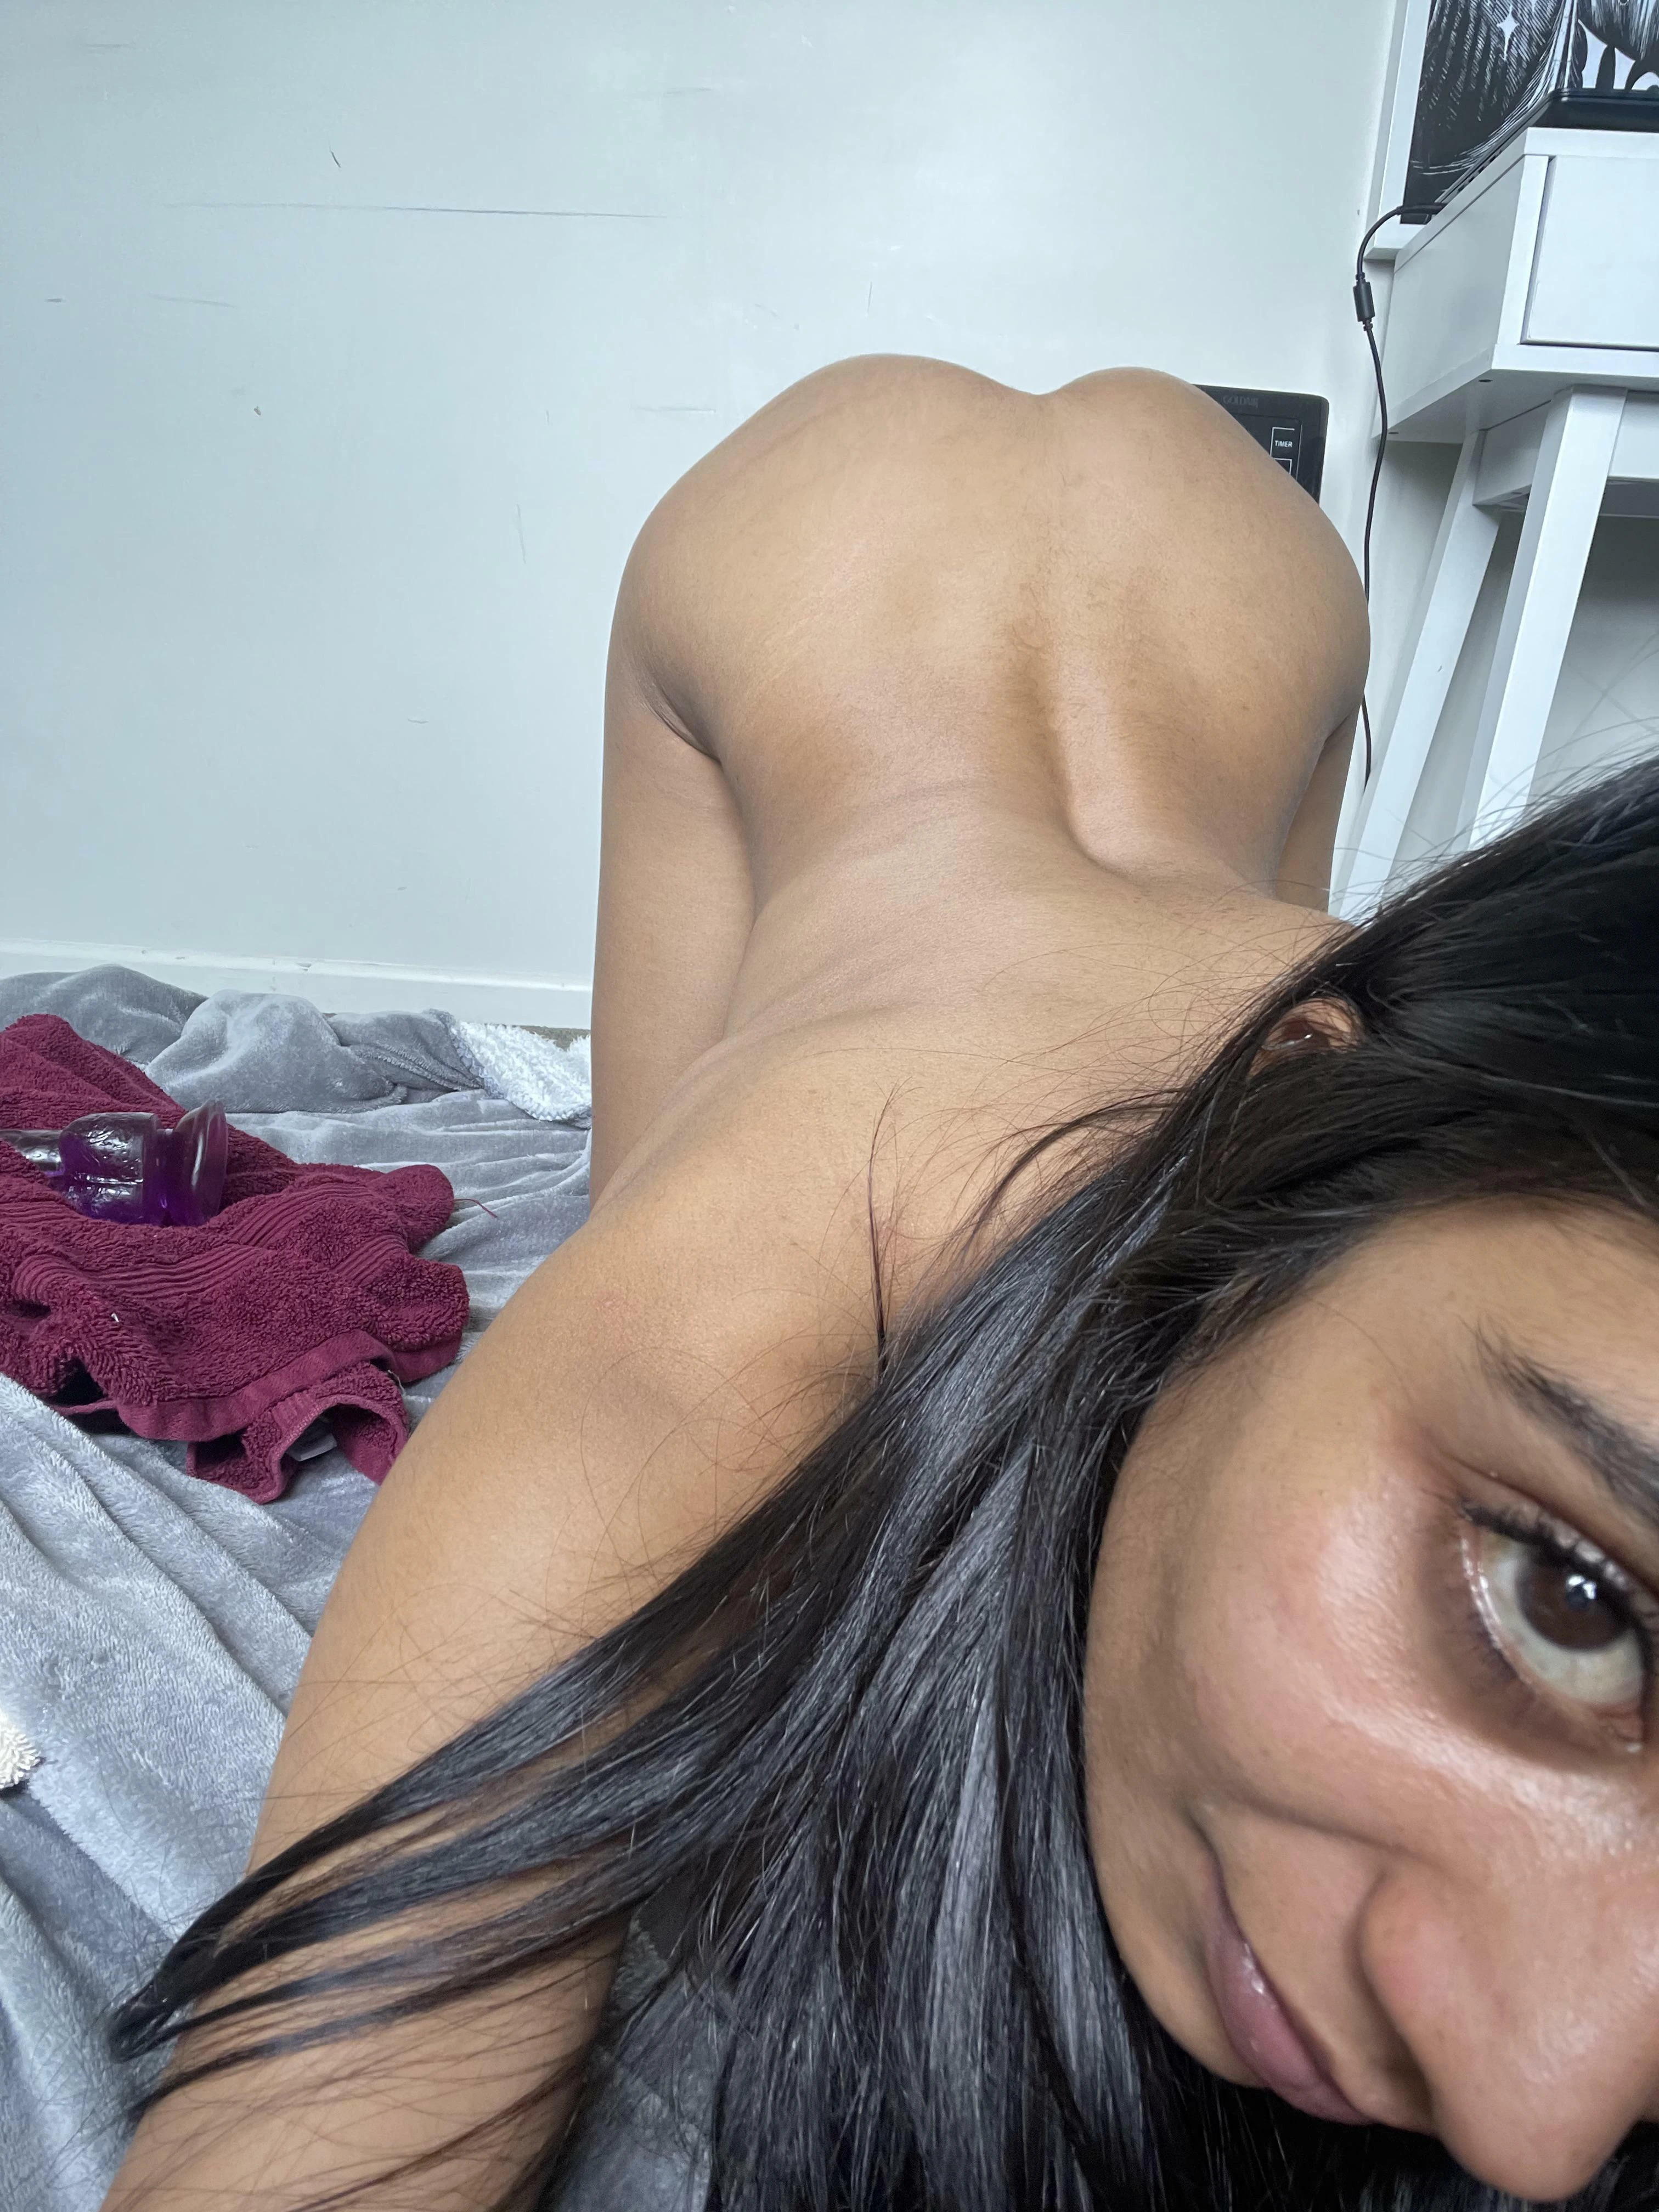 Ever had anal with an Indian girl?